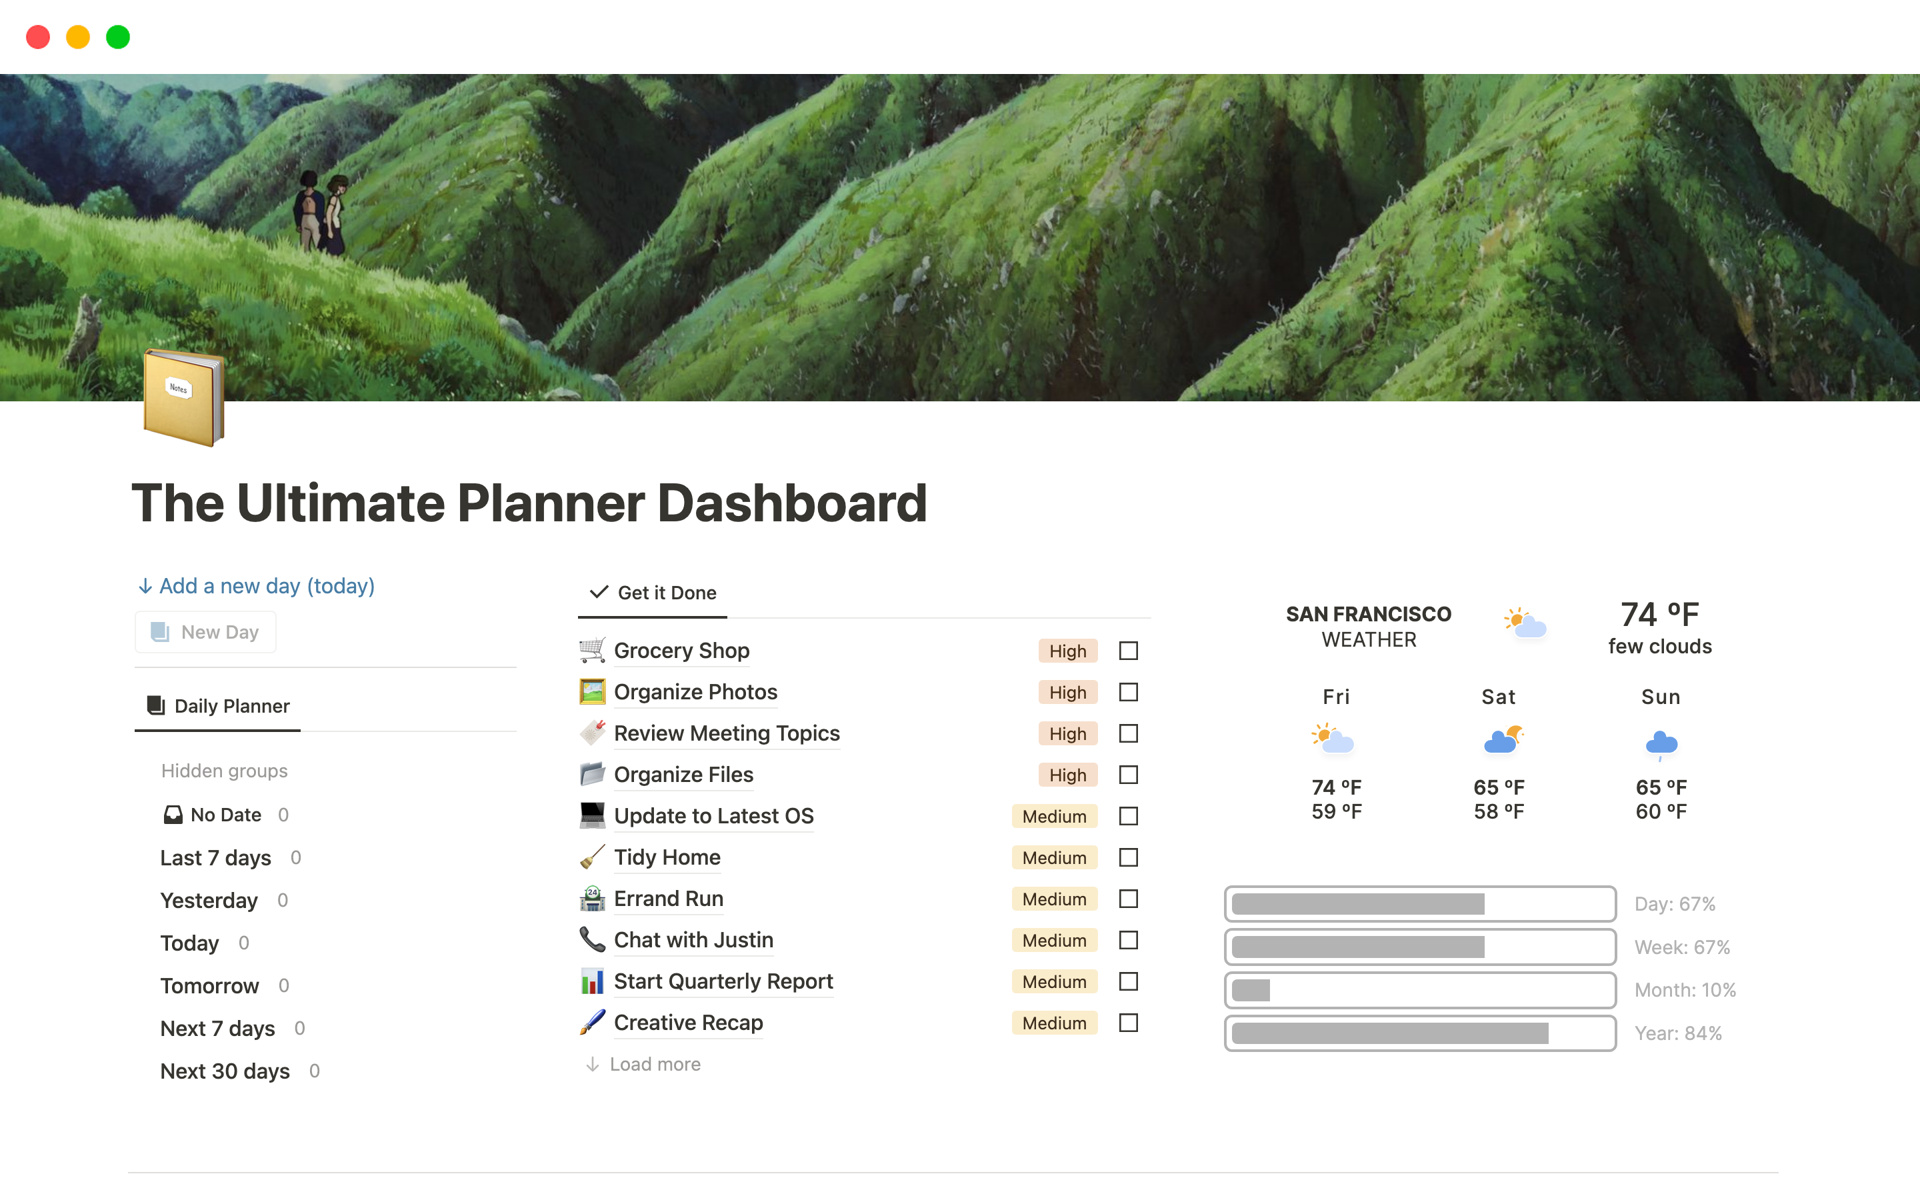 The Ultimate Planner Dashboard is a robust Notion daily planner template that gives you full visibility of your schedule, tasks, wellness, and moods by the day, week, and month — all connected in one place.